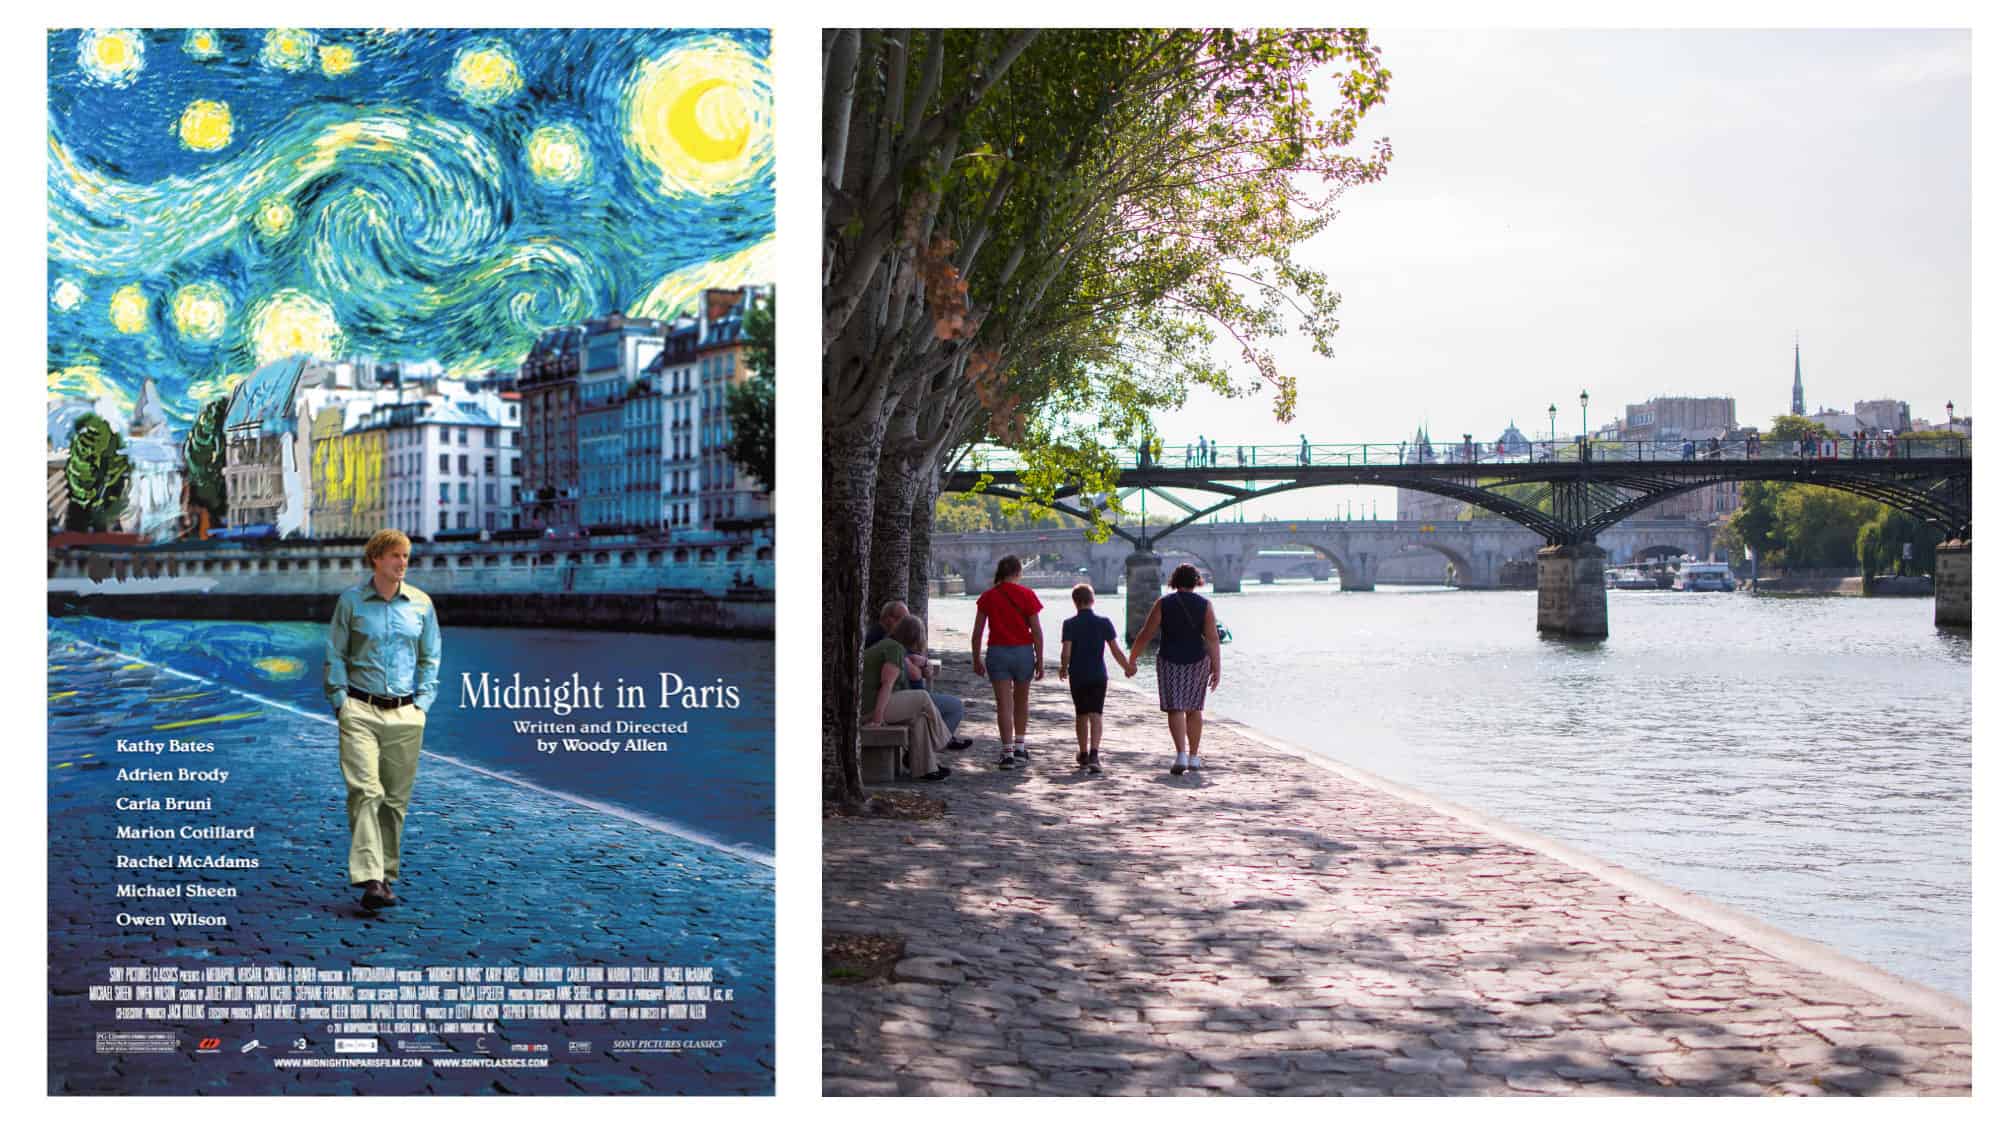 A poster for the movie "Midnight in Paris" (left). Three people strolling along the cobblestone banks of the River Seine in the sun (right).